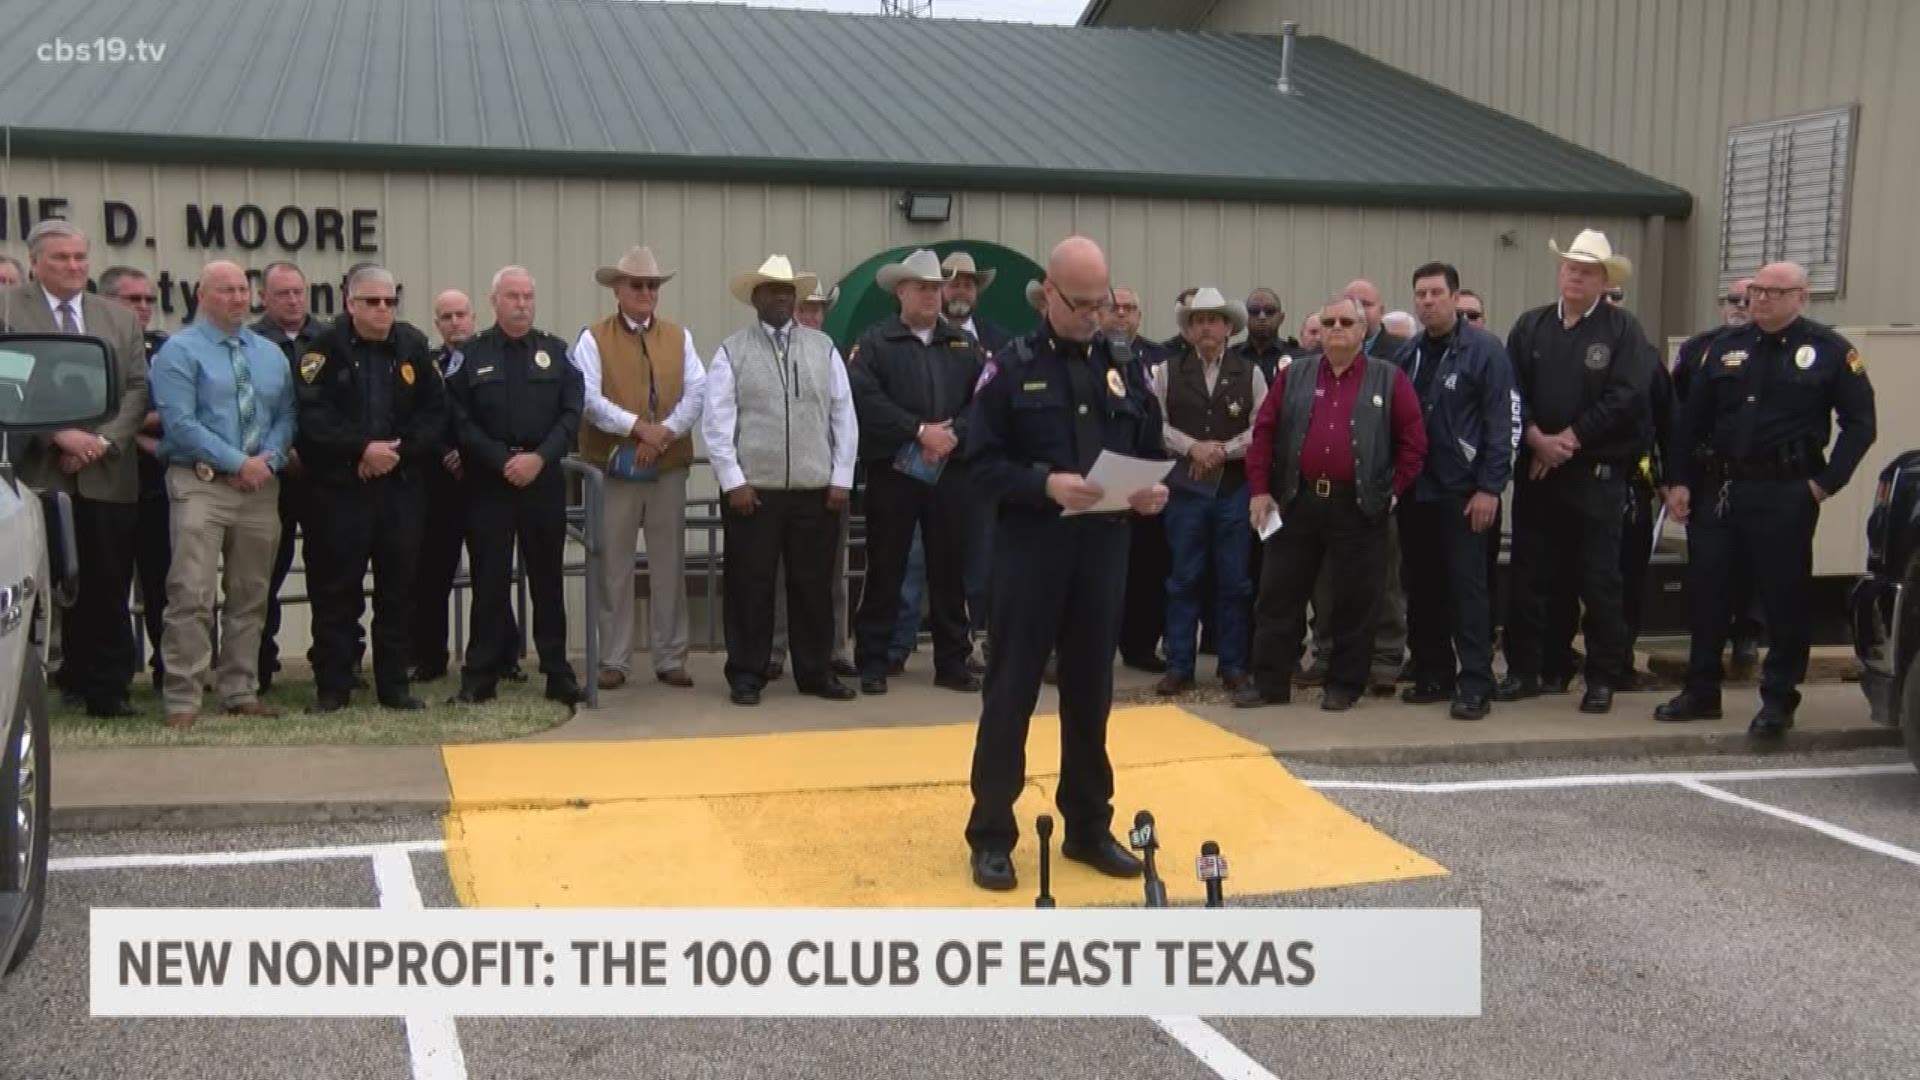 Twenty law enforcements from different counties in East Texas are coming together for the 100 Club.